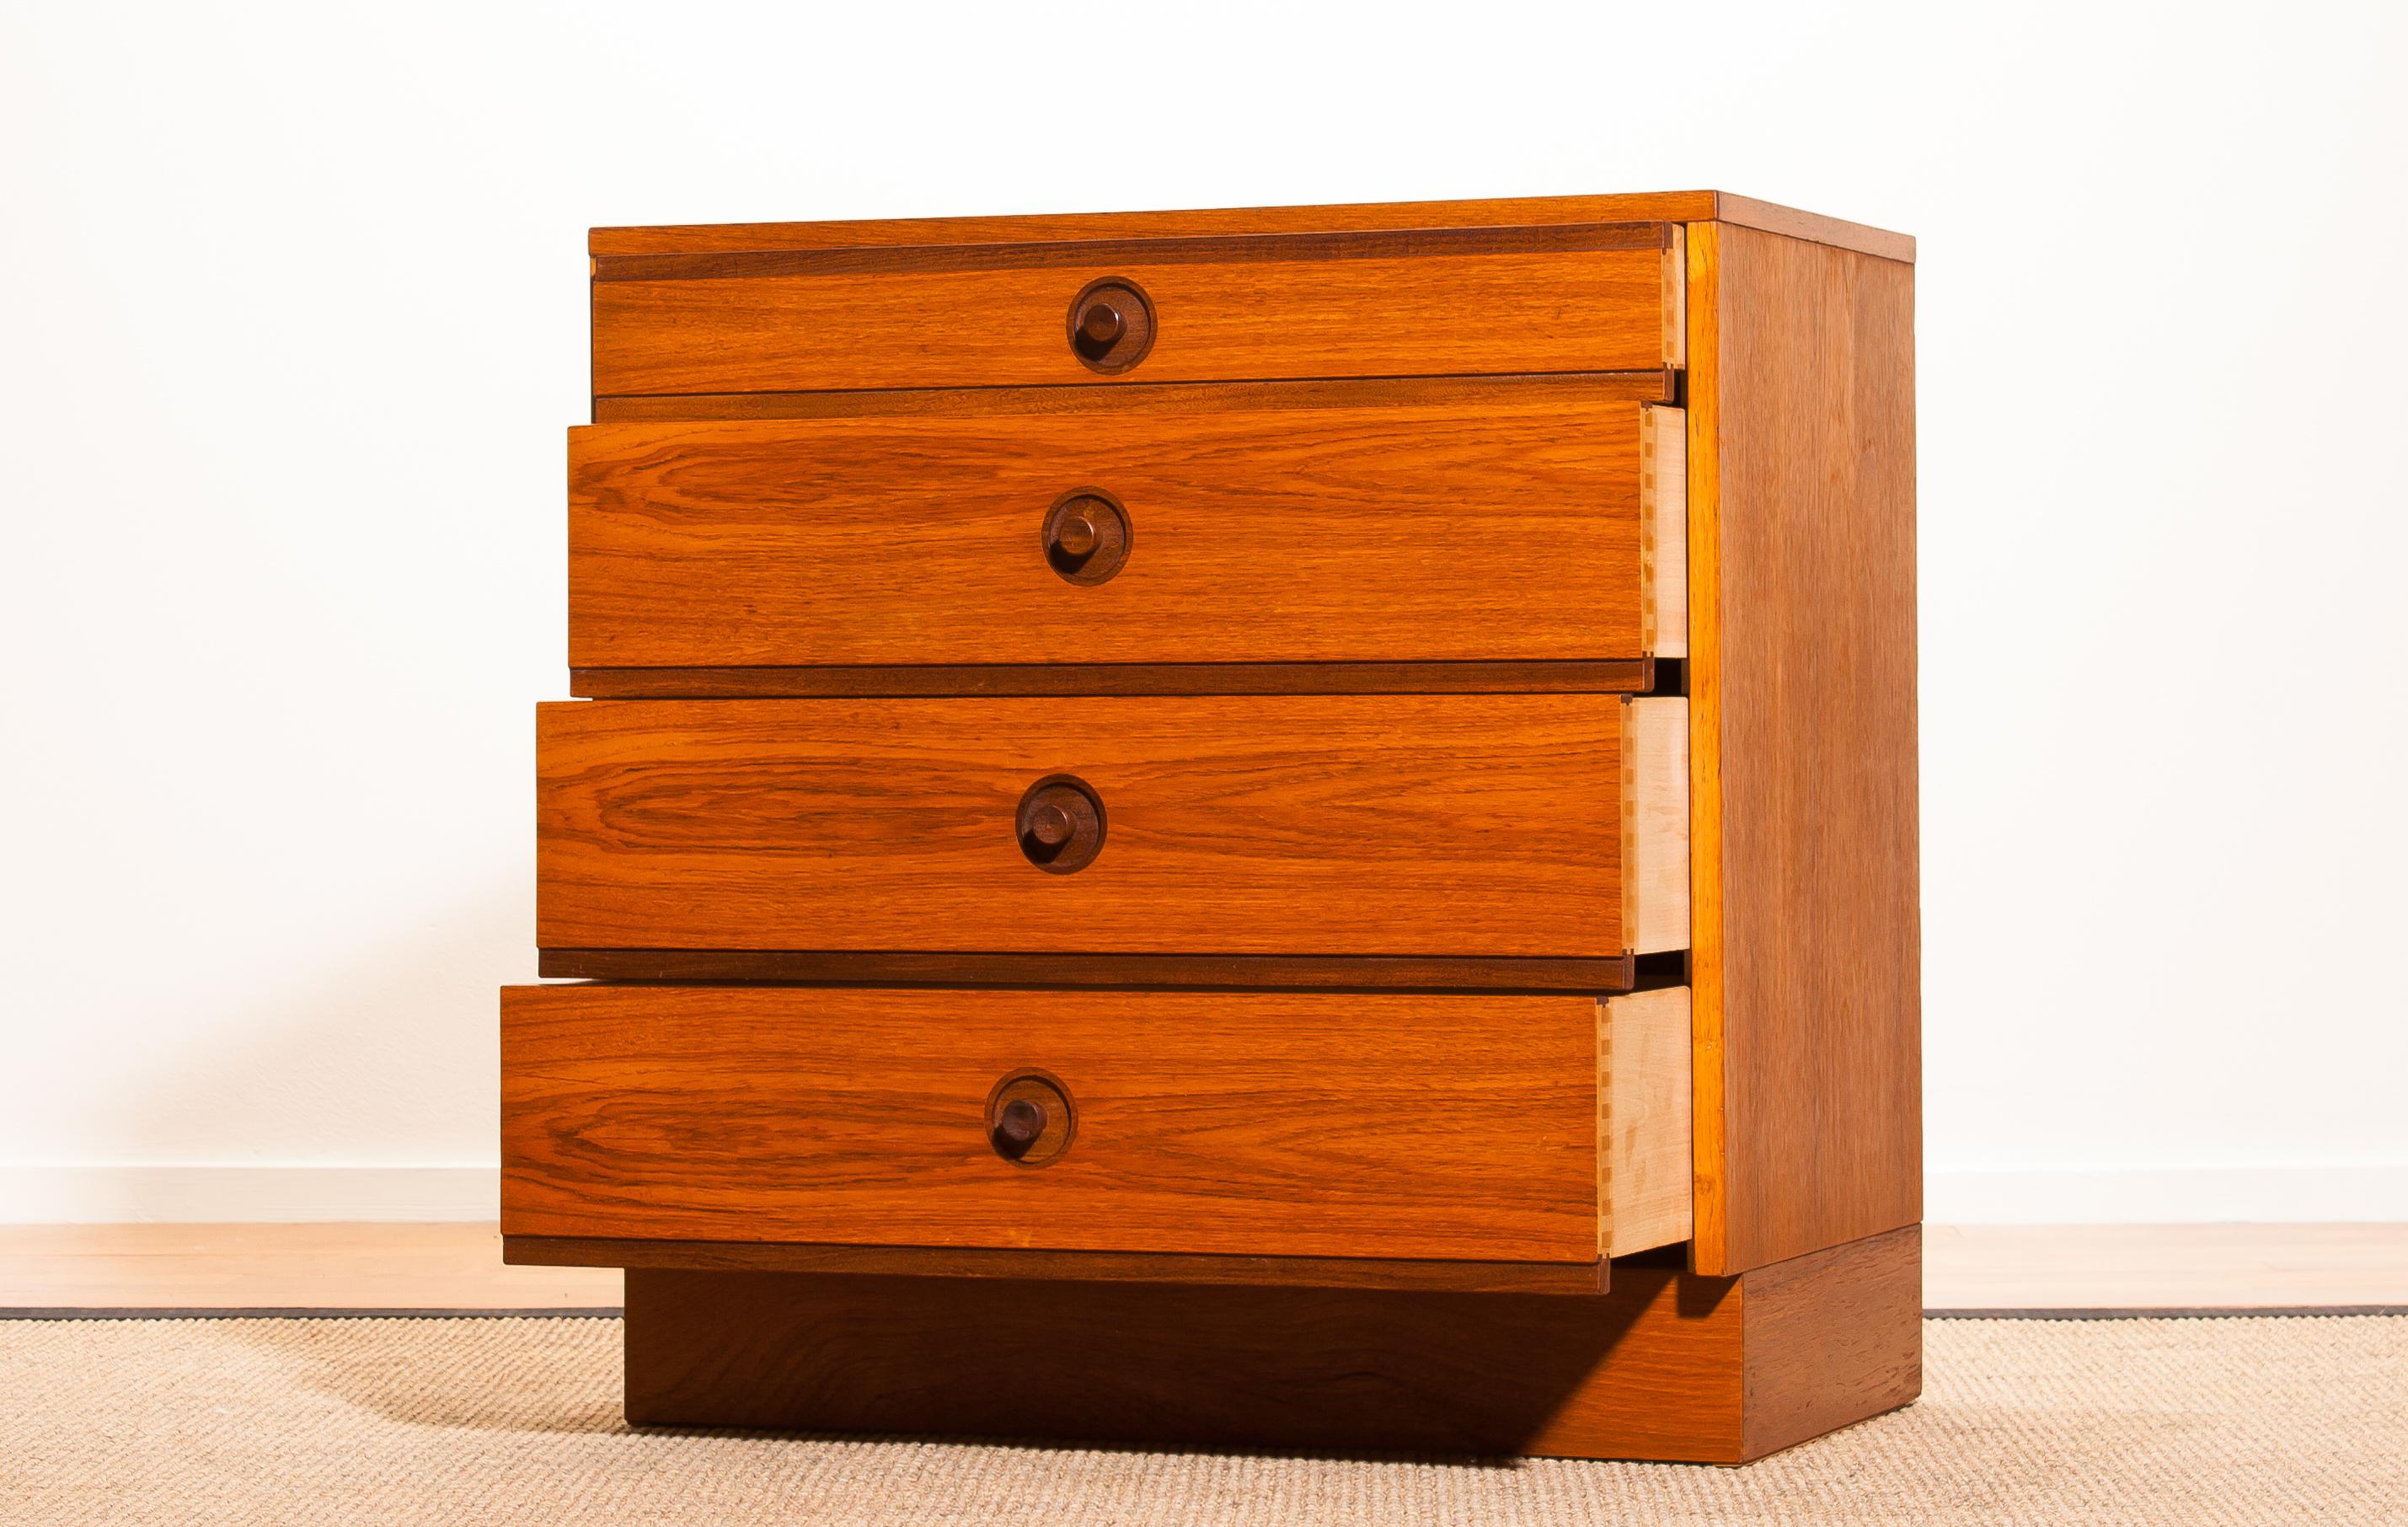 Very nice chest of drawers by Børge Mogensen for Karl Andersson & Söner, Denmark.
This cabinet is made of teak and has four drawers.
It is in a beautiful condition.
Period 1950s.
Dimensions: H 68 cm, W 66 cm, D 40 cm.